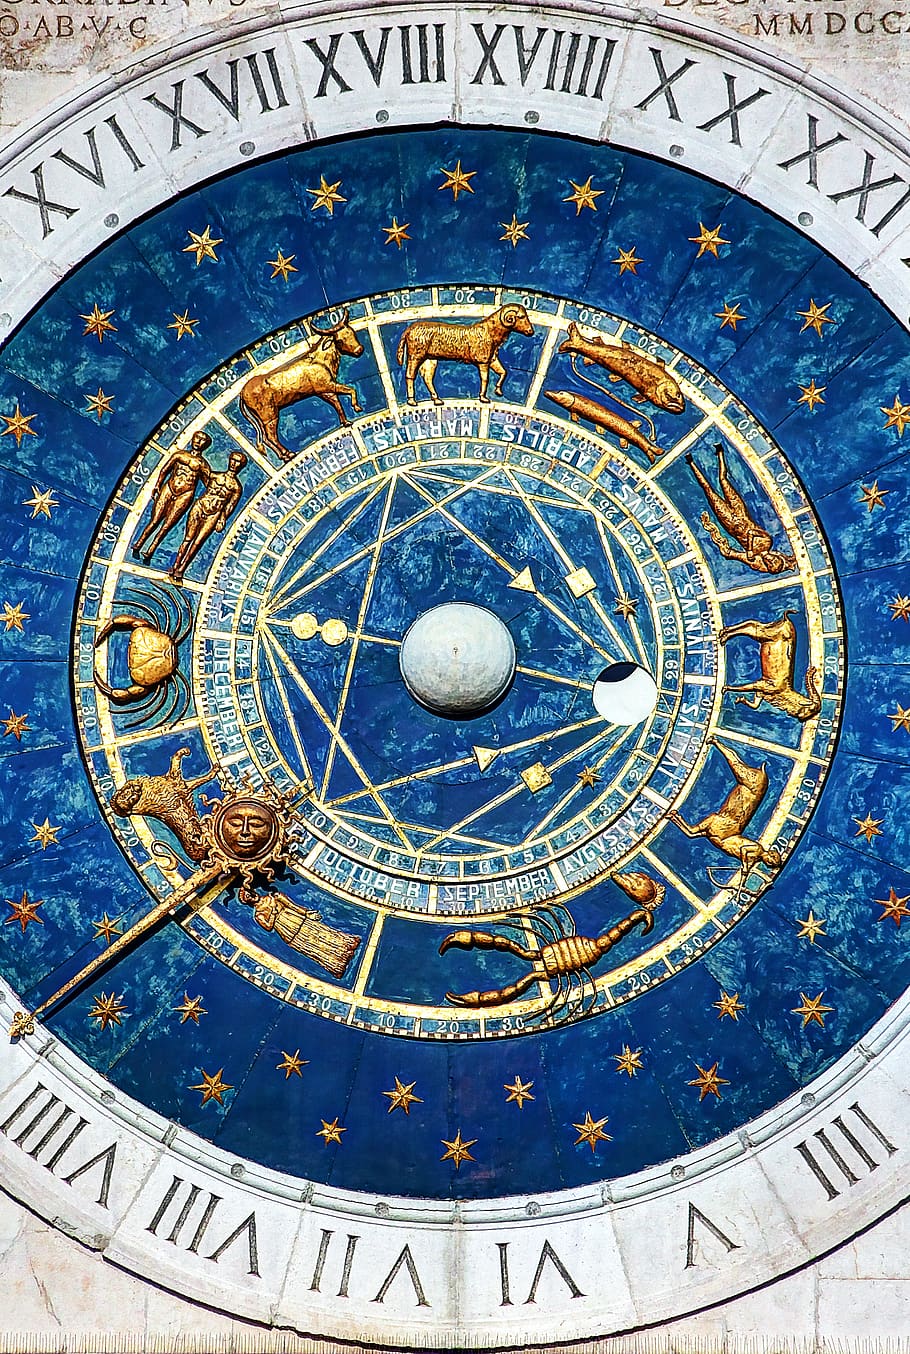 padova, watch, torre, italy, time, the zodiac, astrology sign